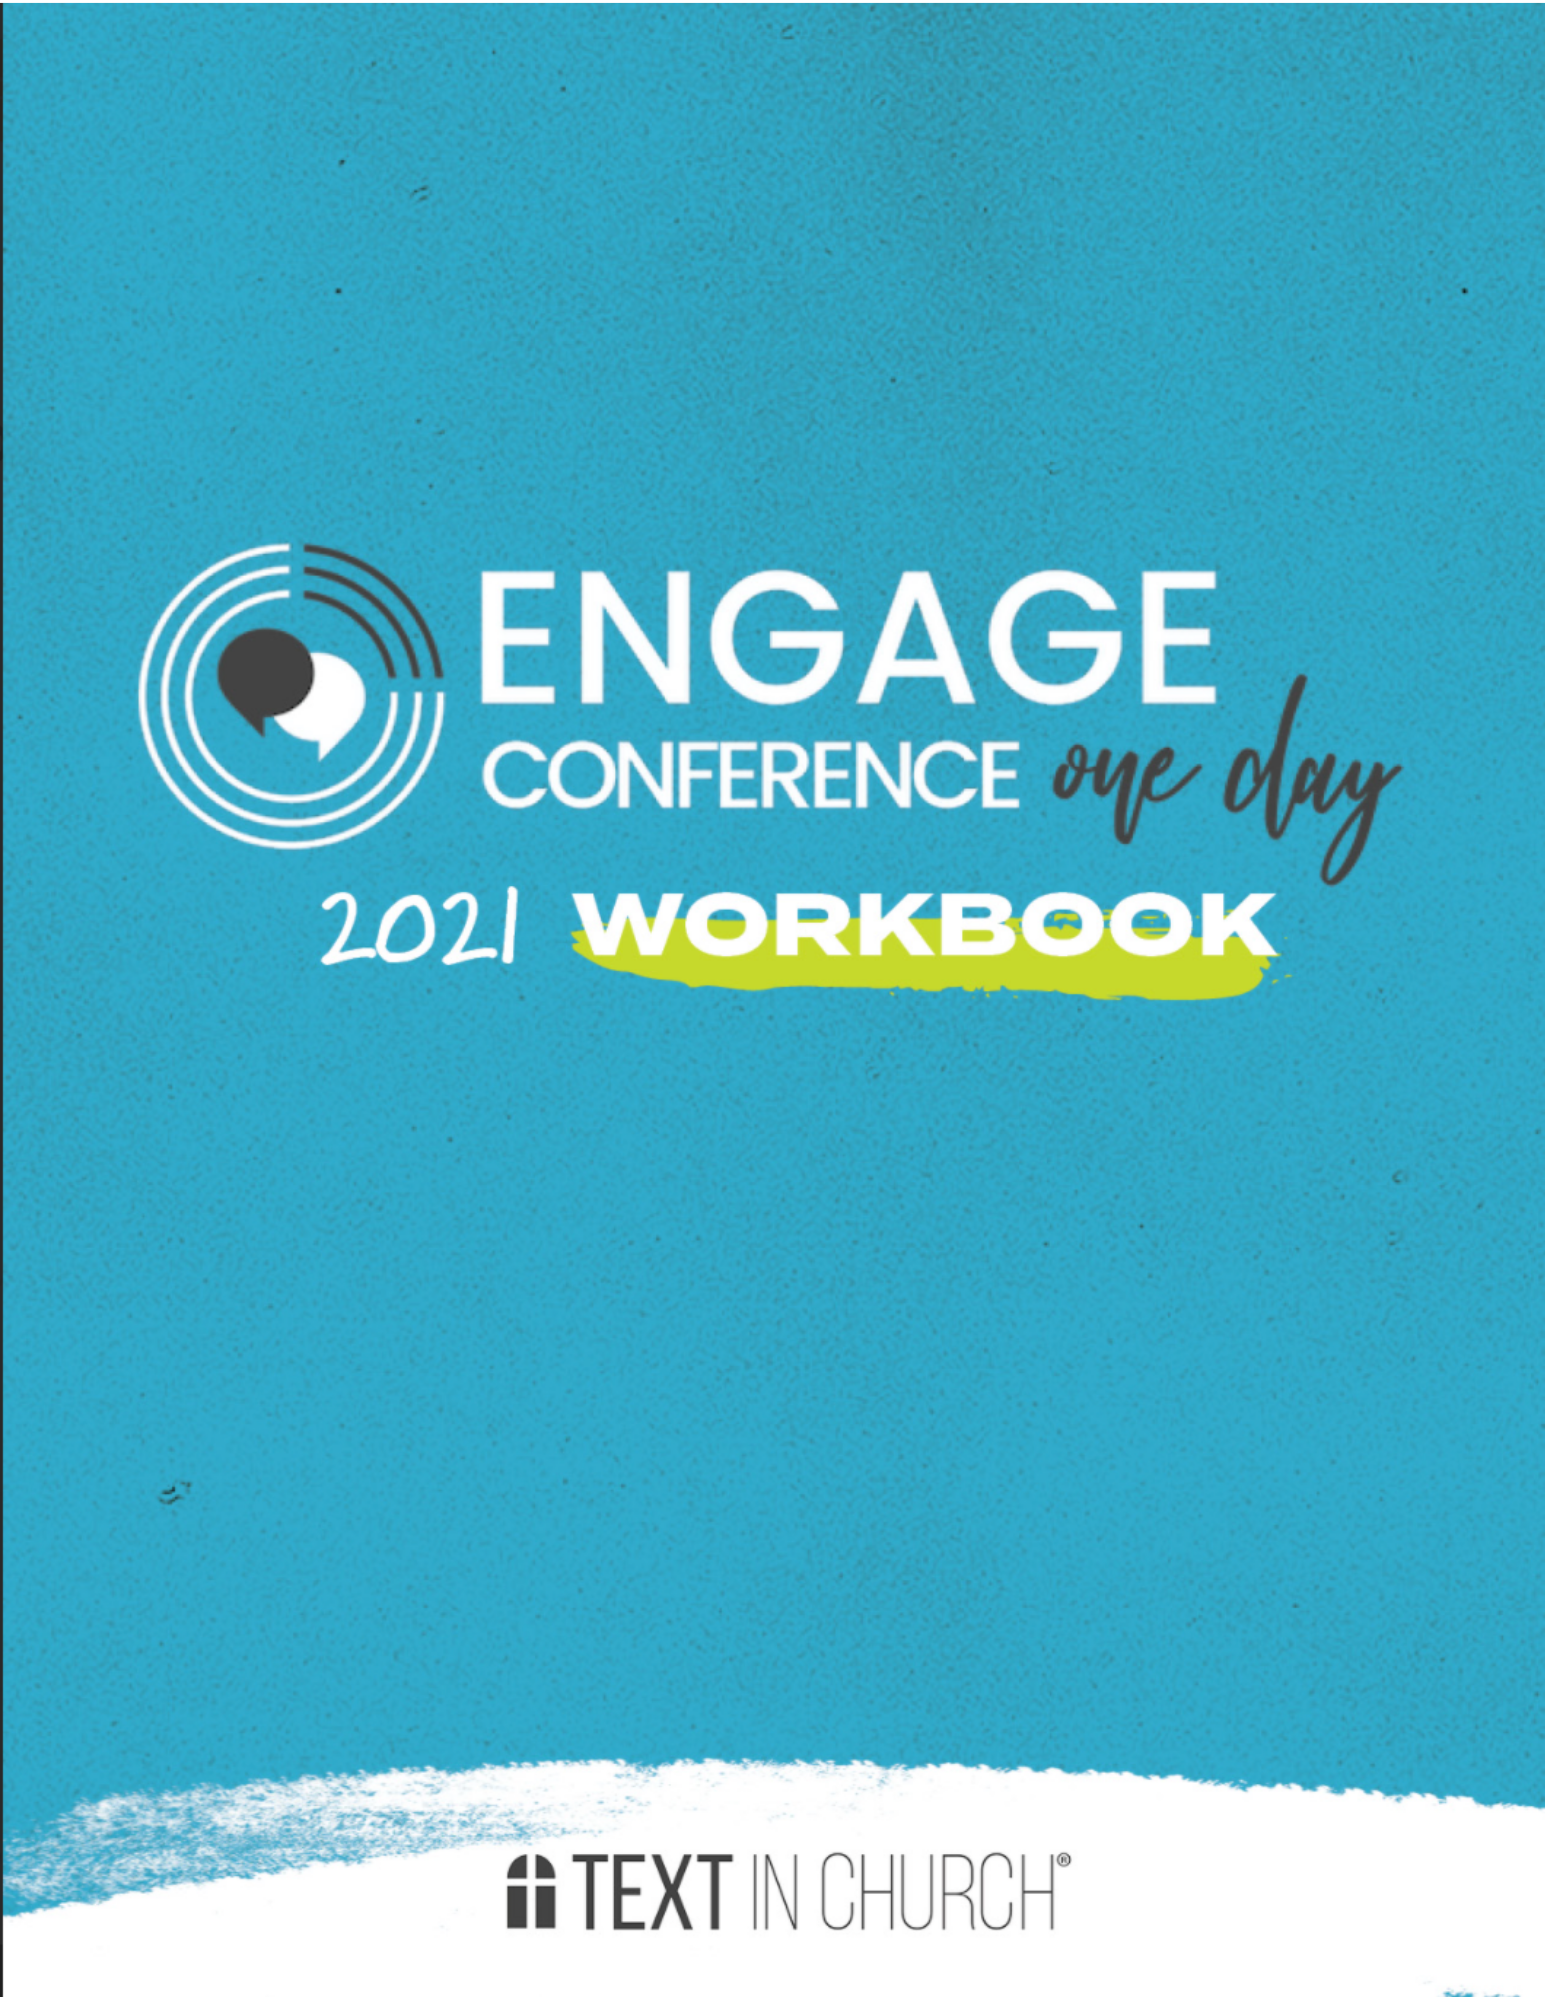 ENGAGE One Day Conference Workbook